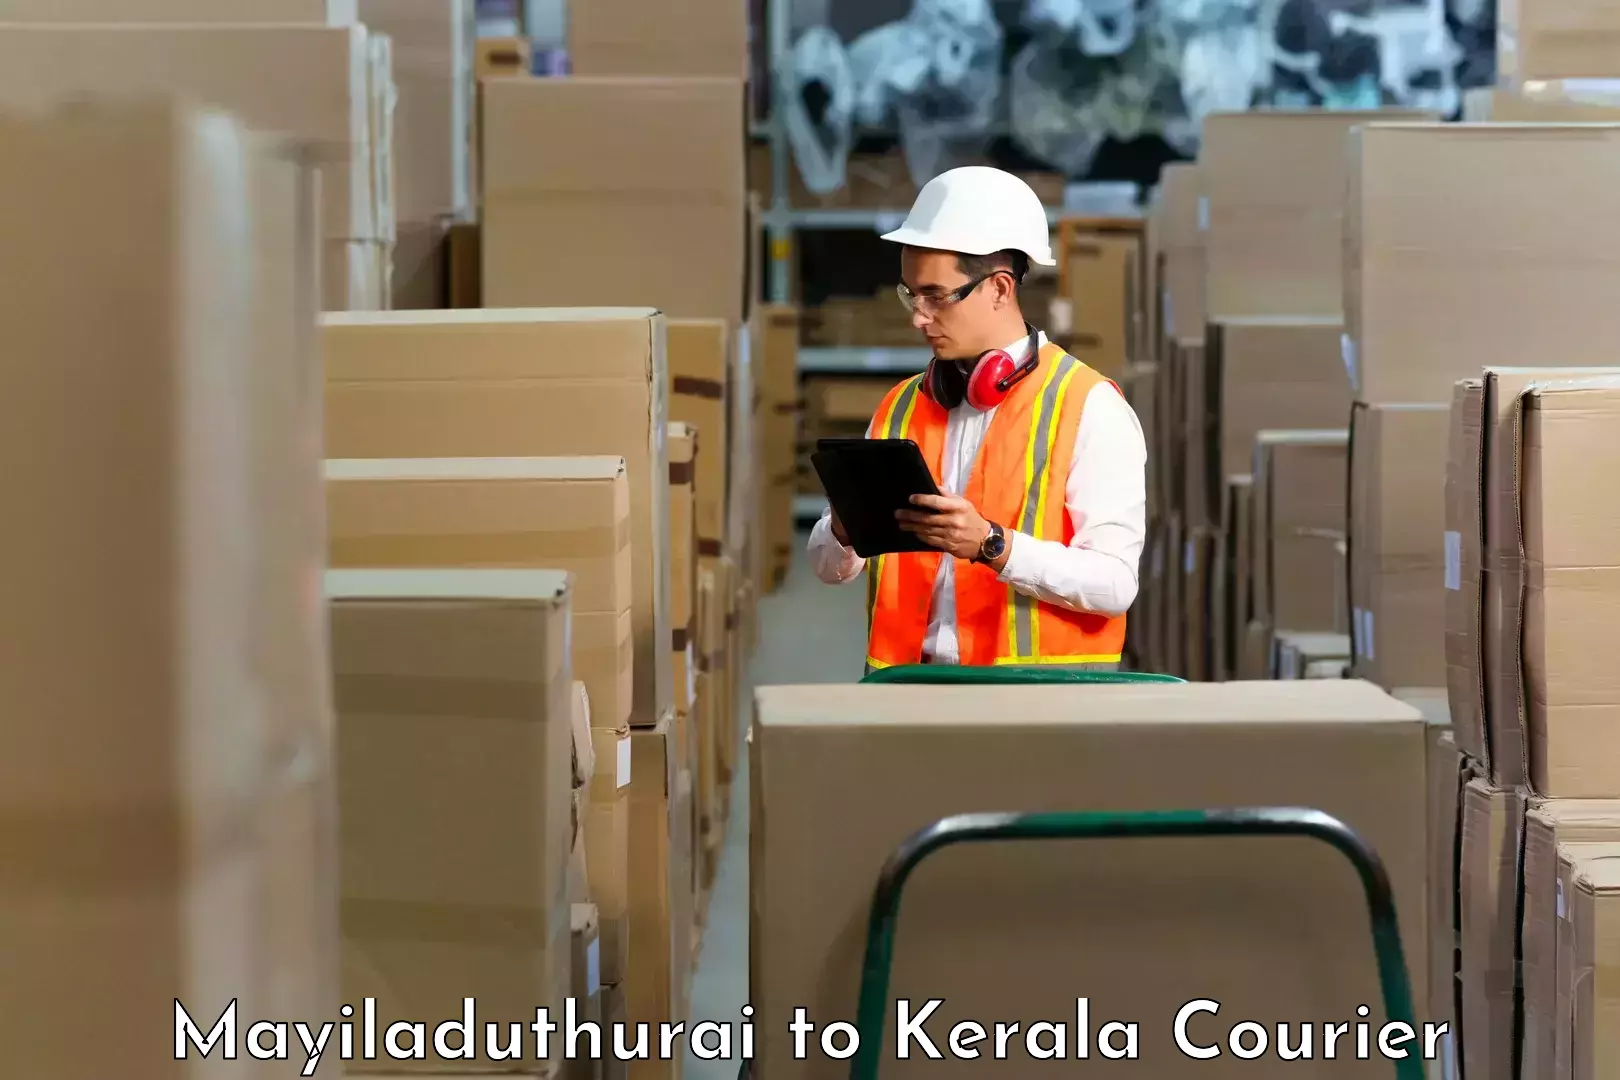 User-friendly courier app Mayiladuthurai to Iritty